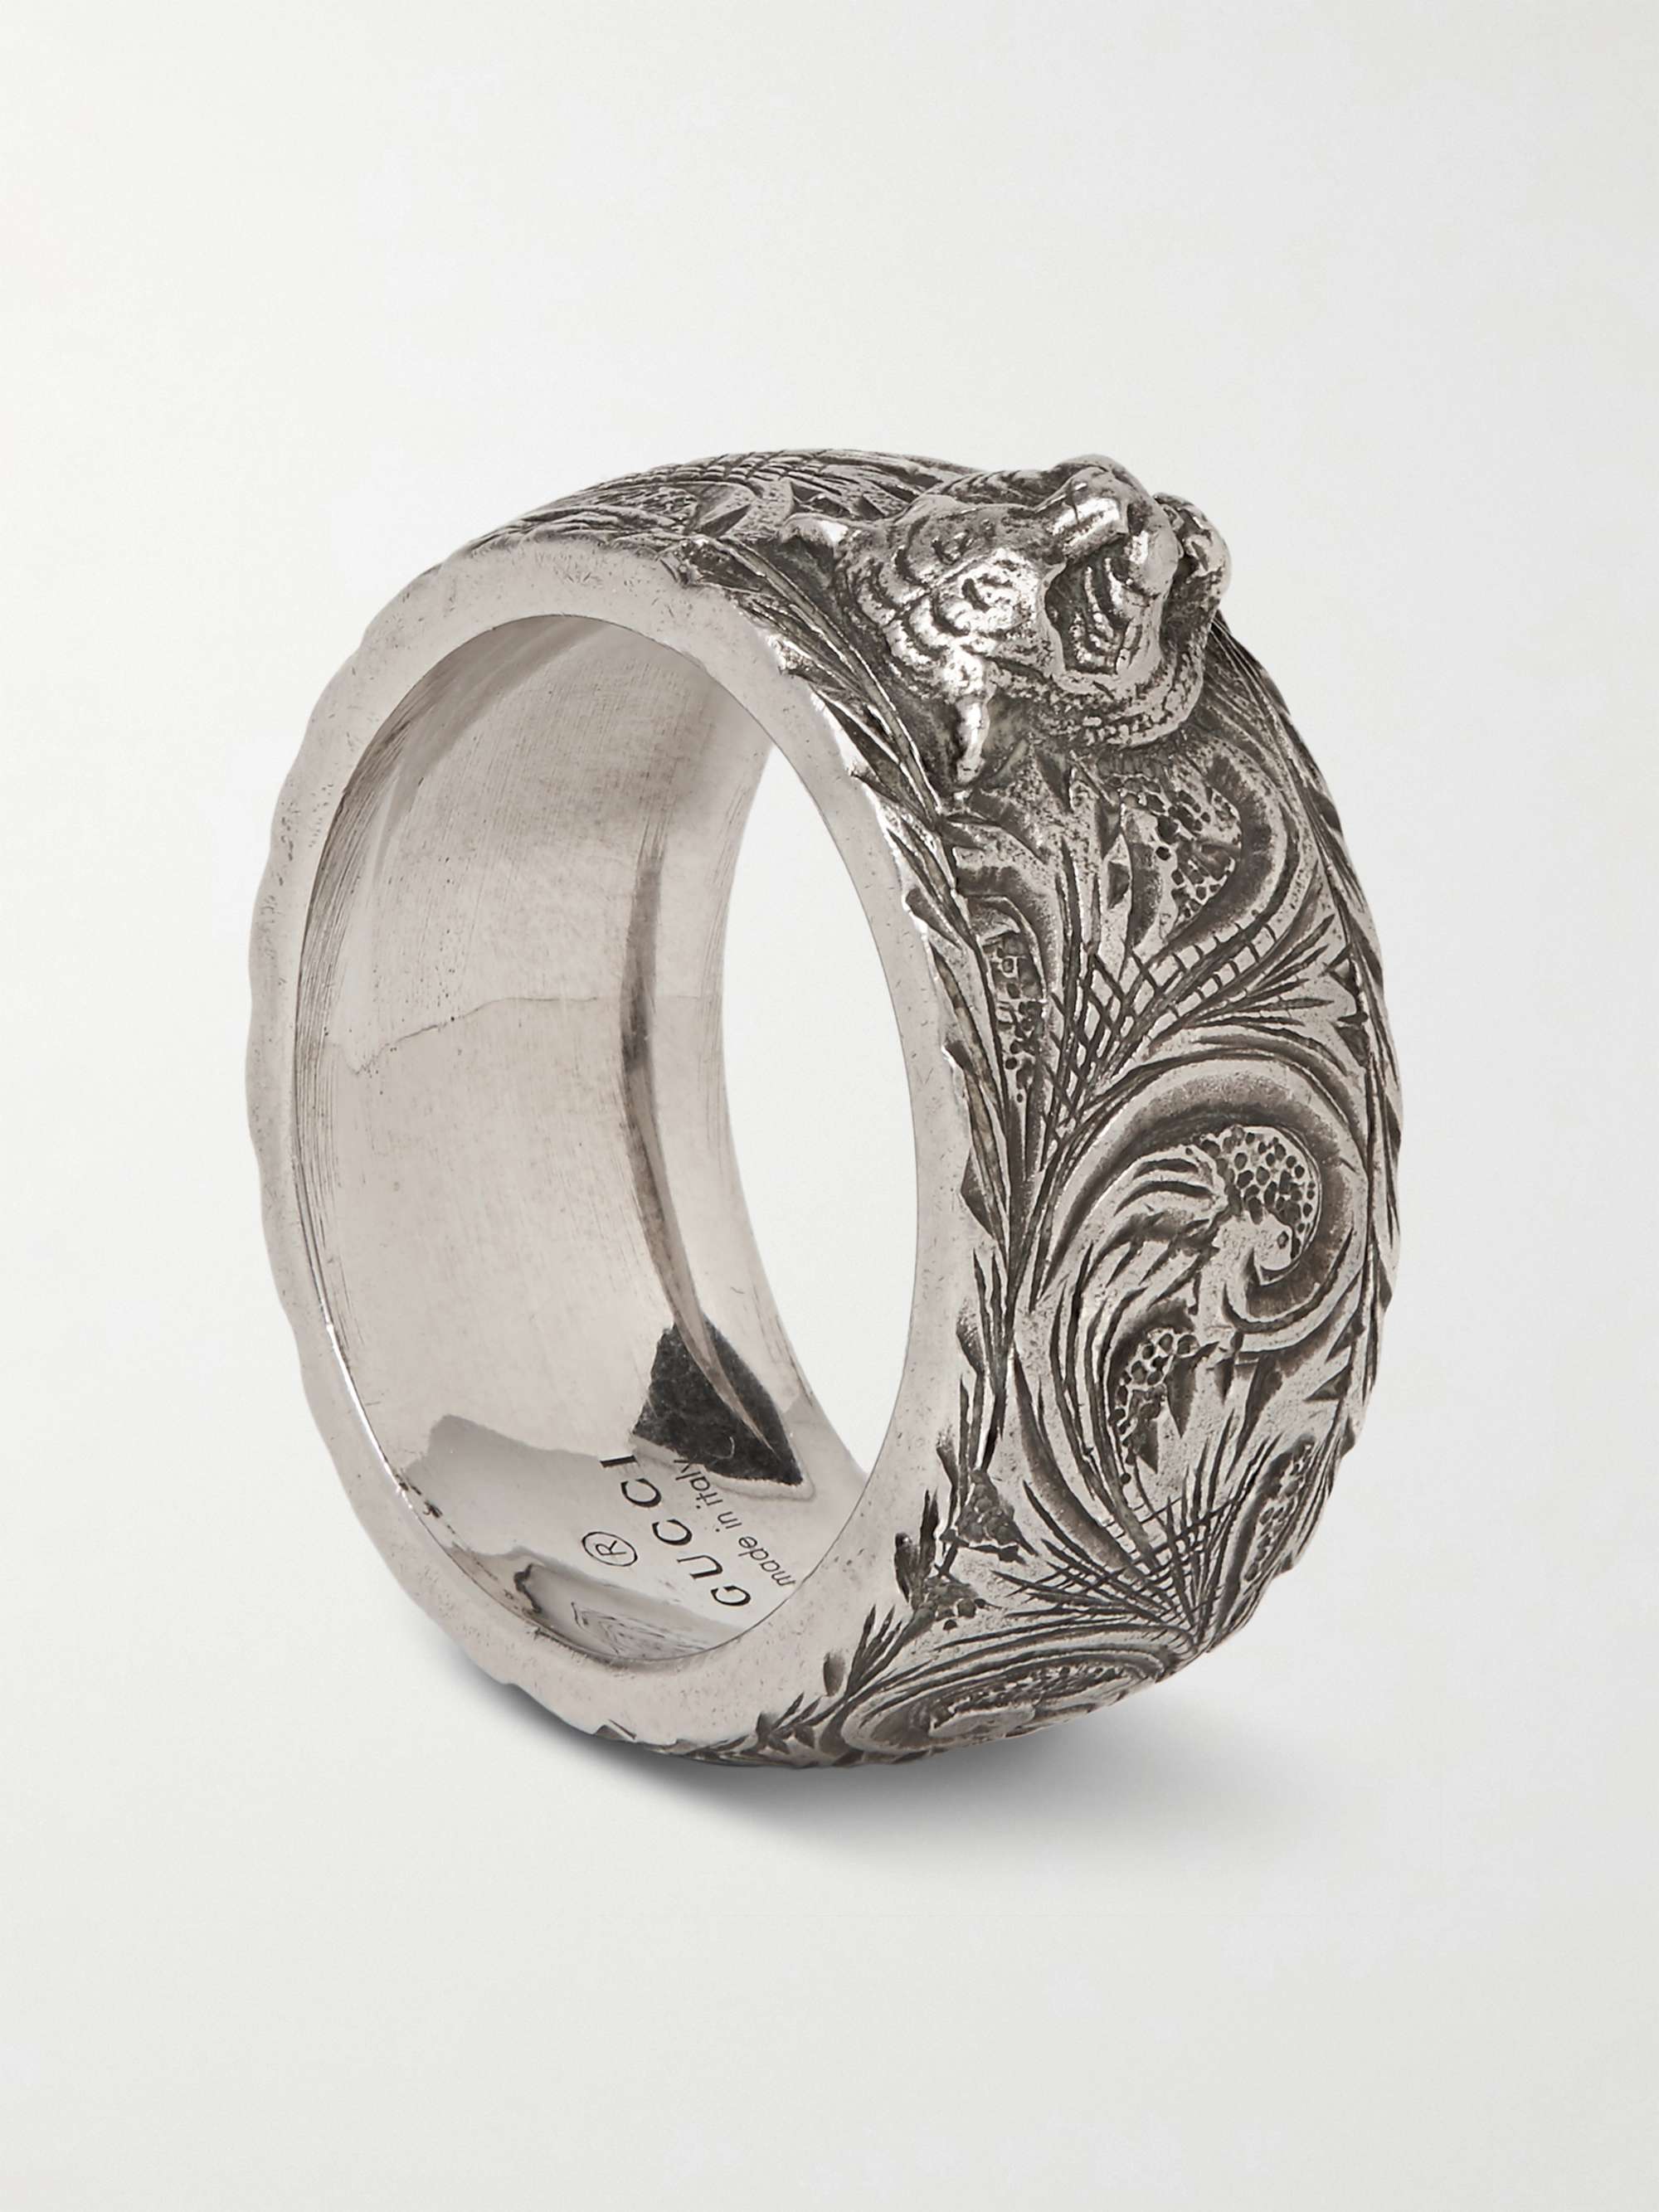 GUCCI Engraved Silver Ring